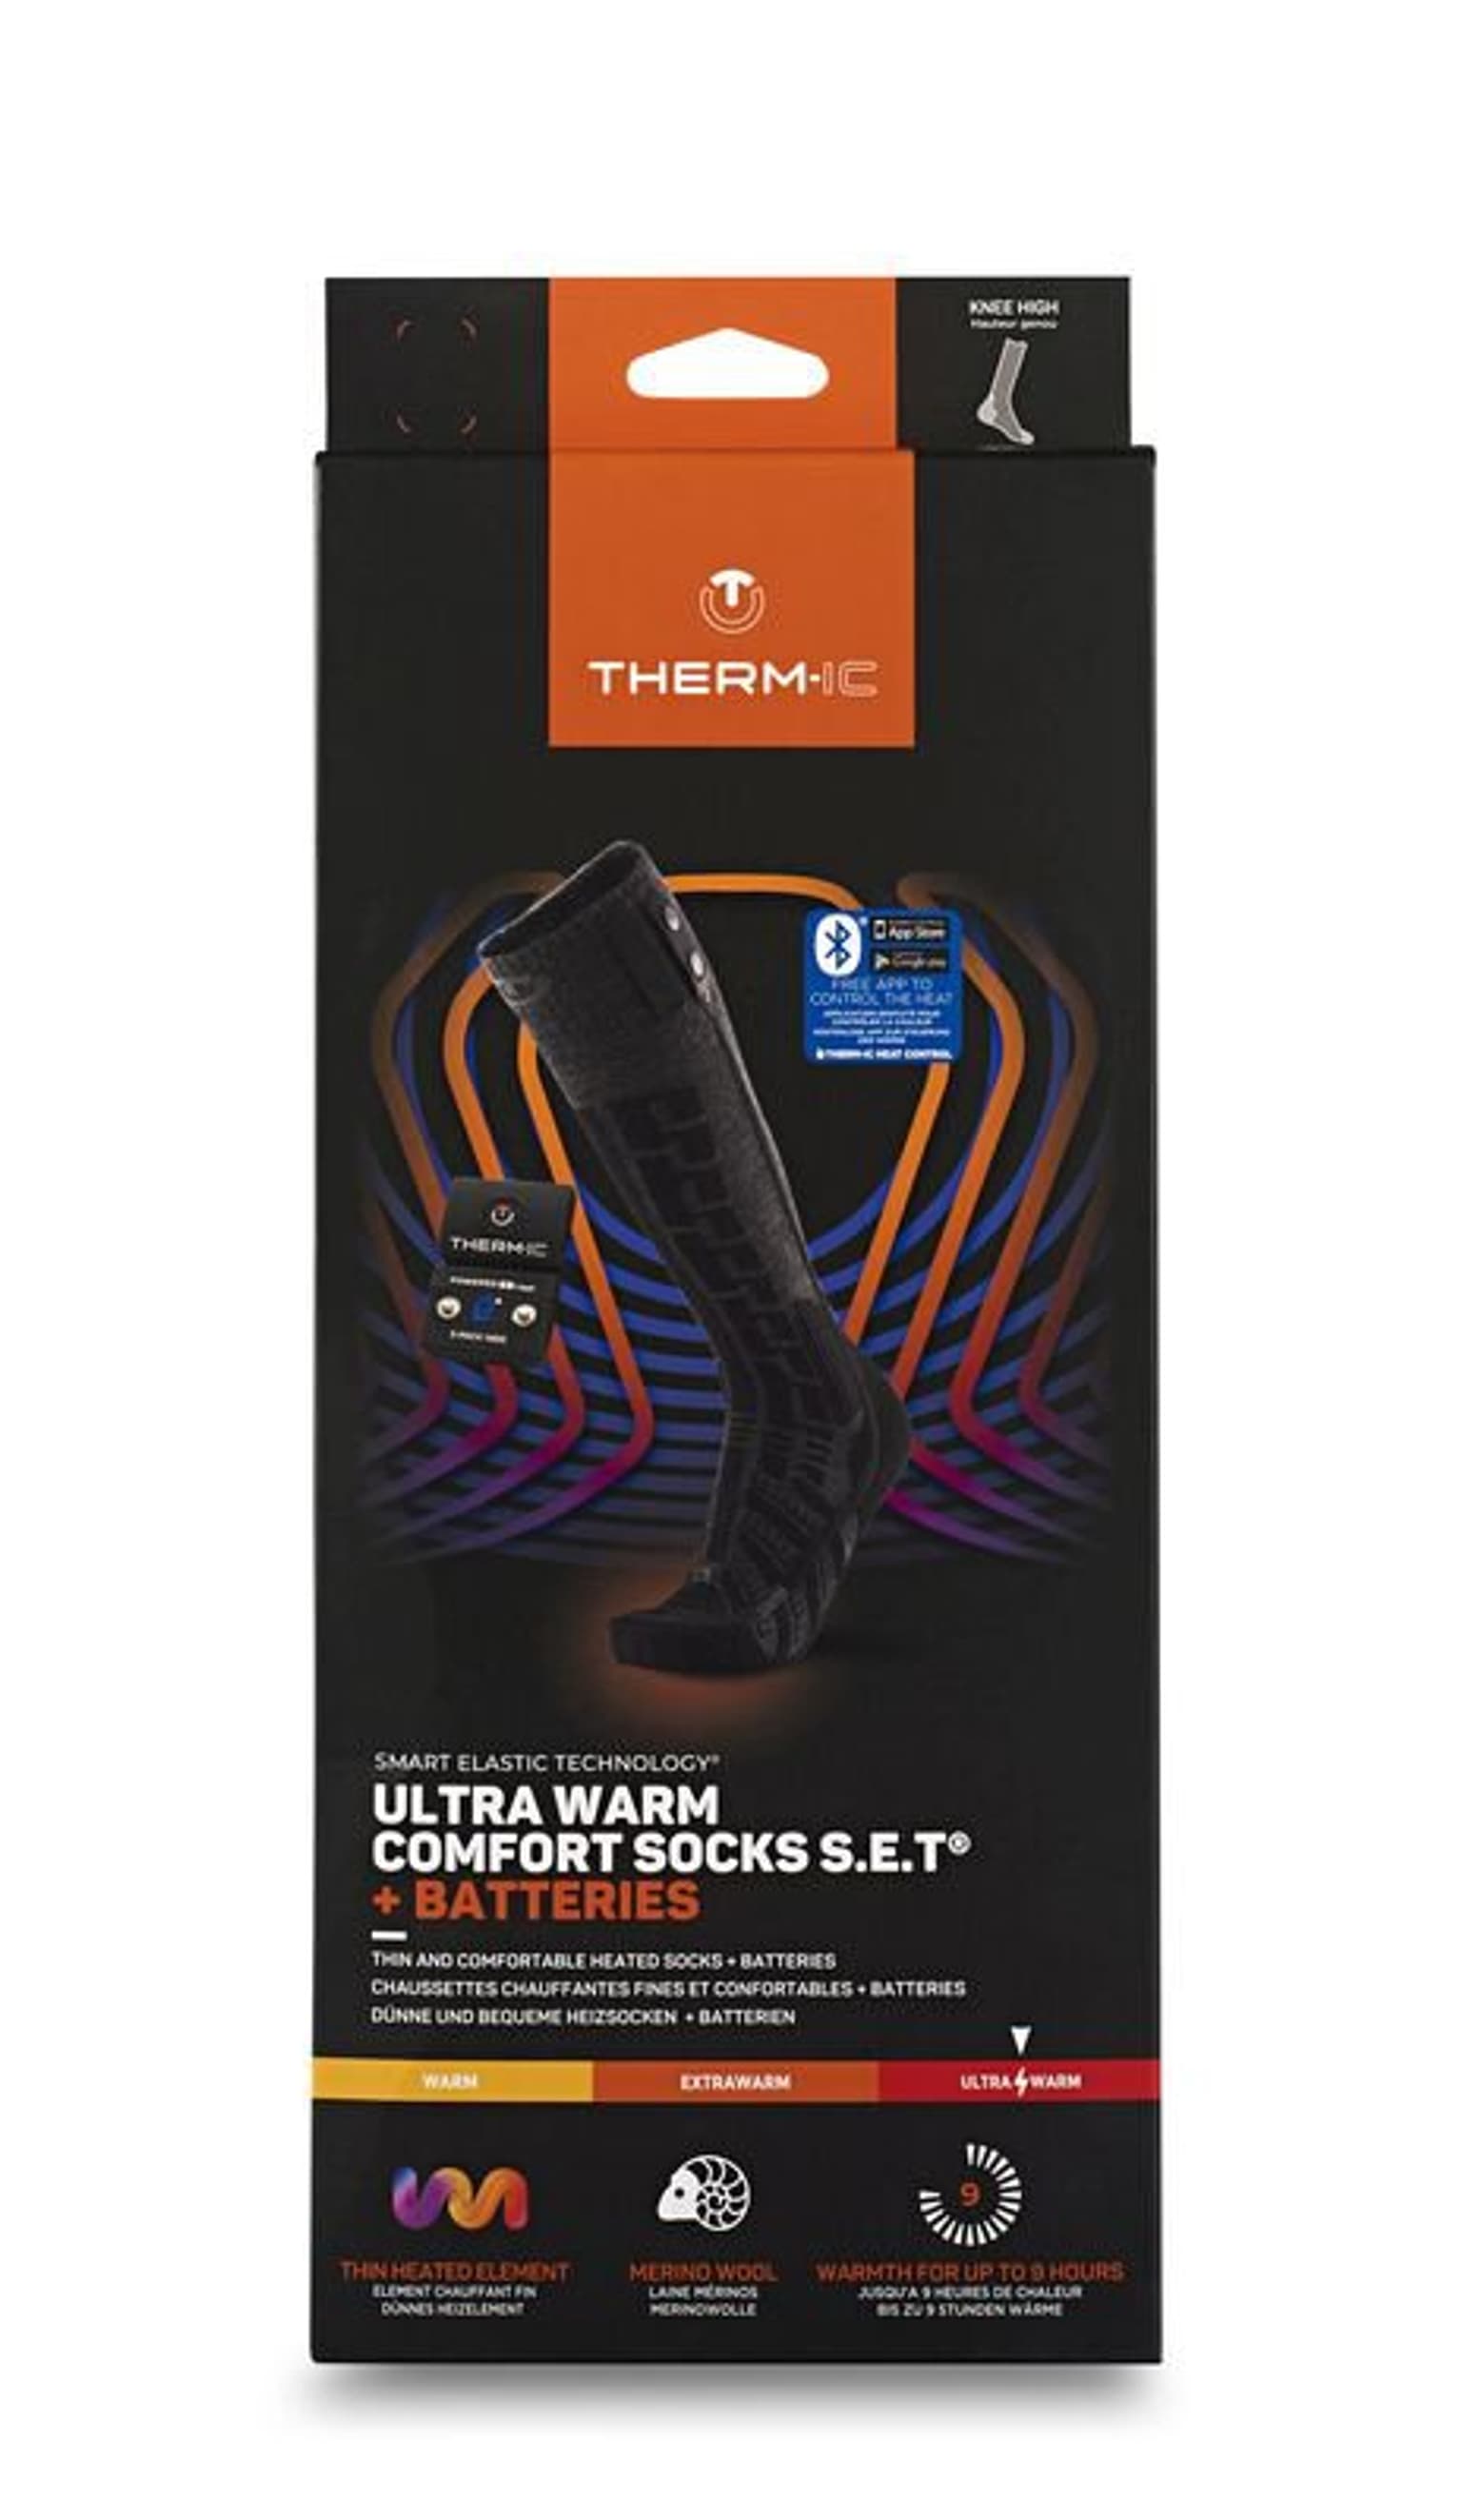 Thermic Thermic Set Powersocks Ultra warm Comfort inkl.S-Pack 1400 BT Chaussettes chauffantes noir 2